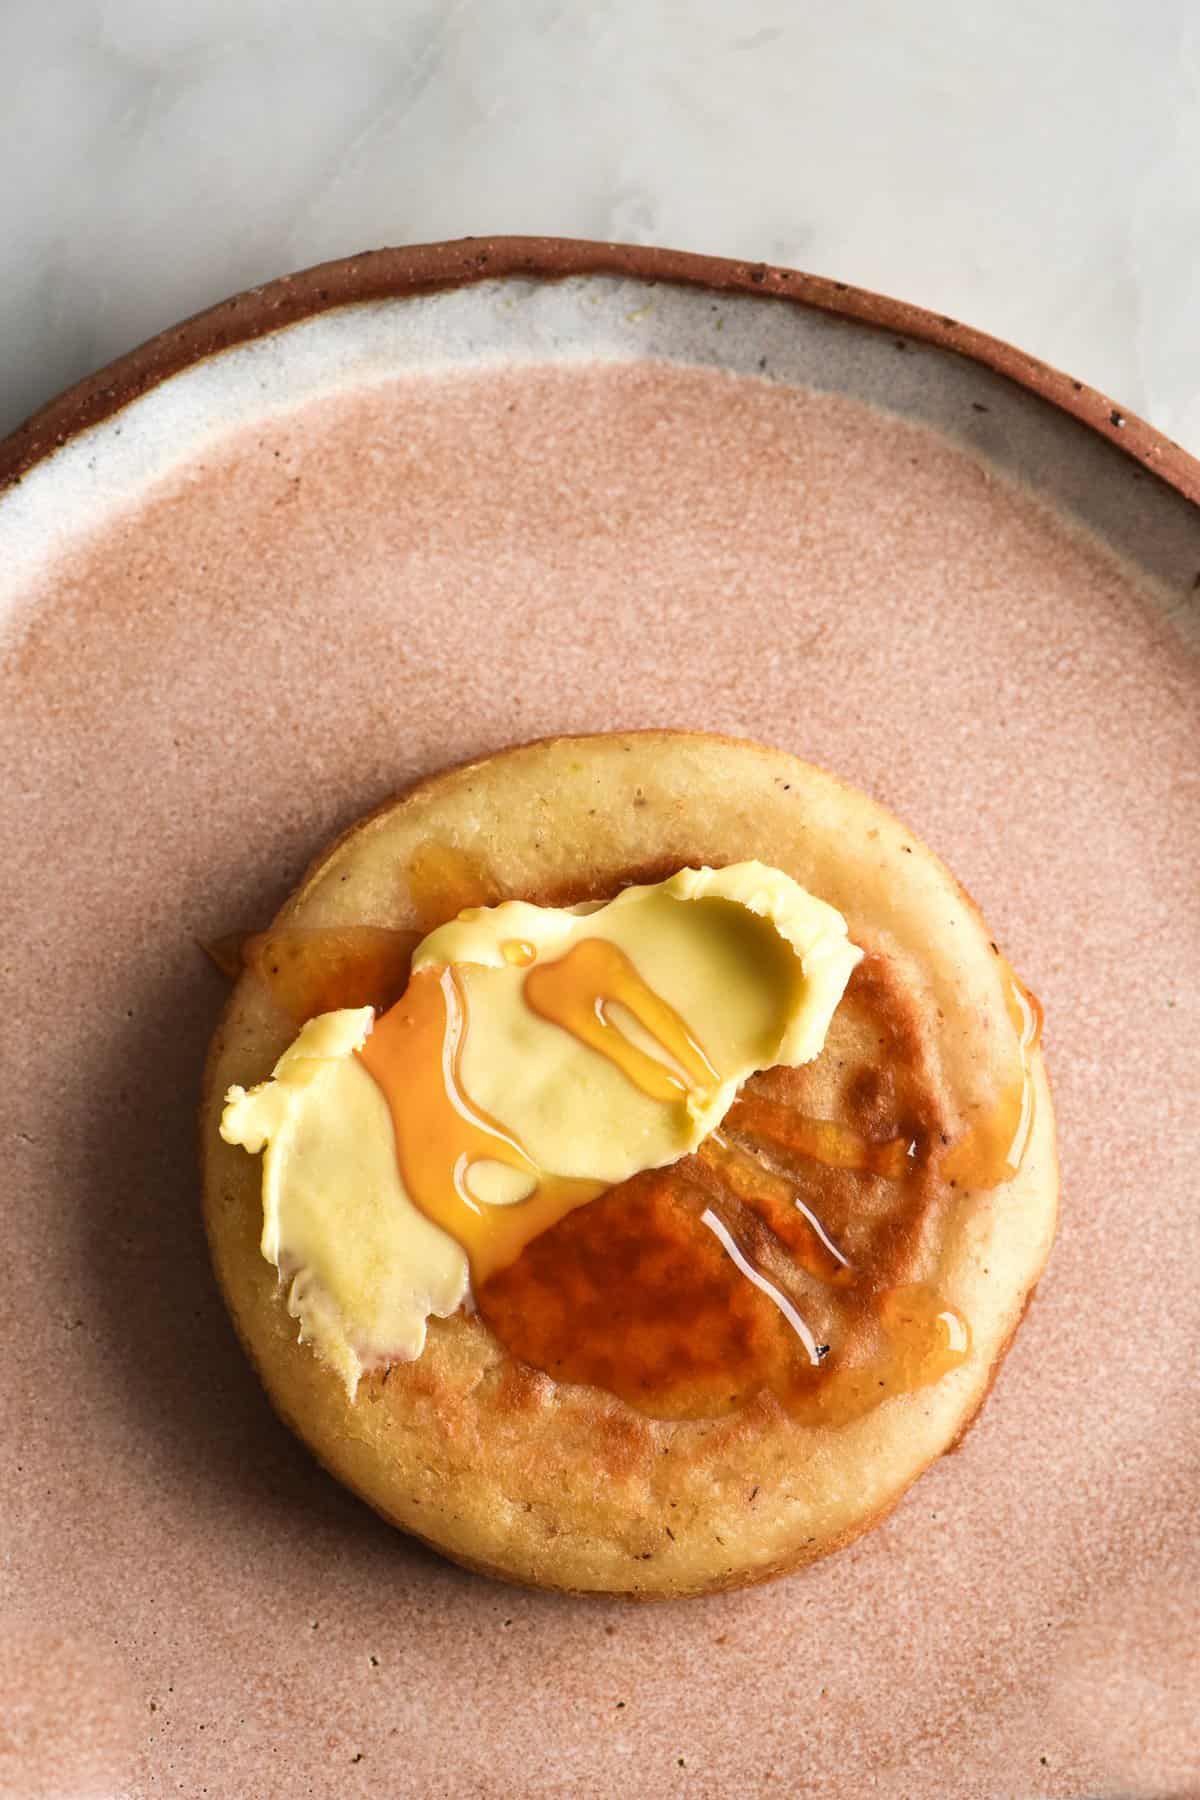 A gluten free crumpet sits atop a pale pink ceramic plate. The crumpet is topped with melting butter and a drizzle of honey